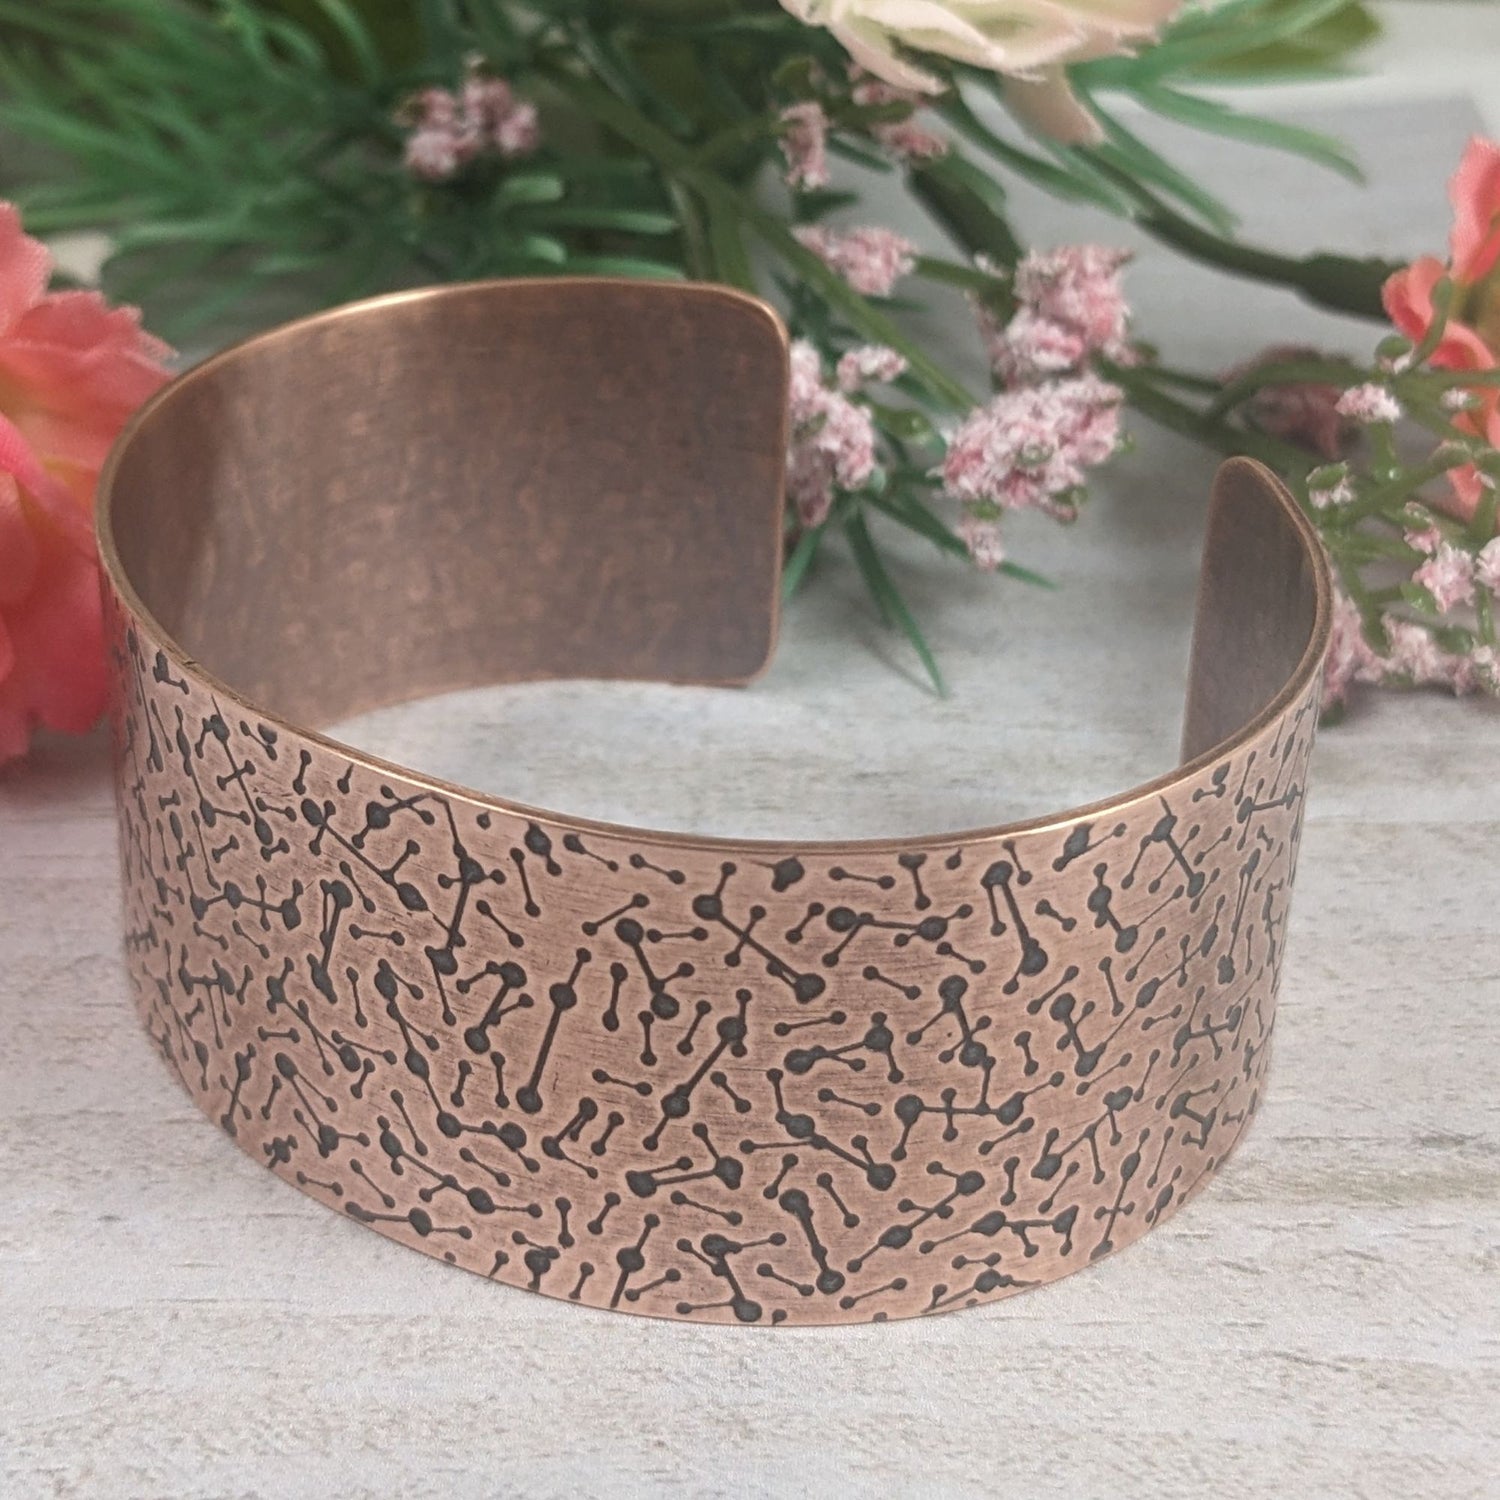 copper cuff covered in lines with dots on the ends to represent a meteor design